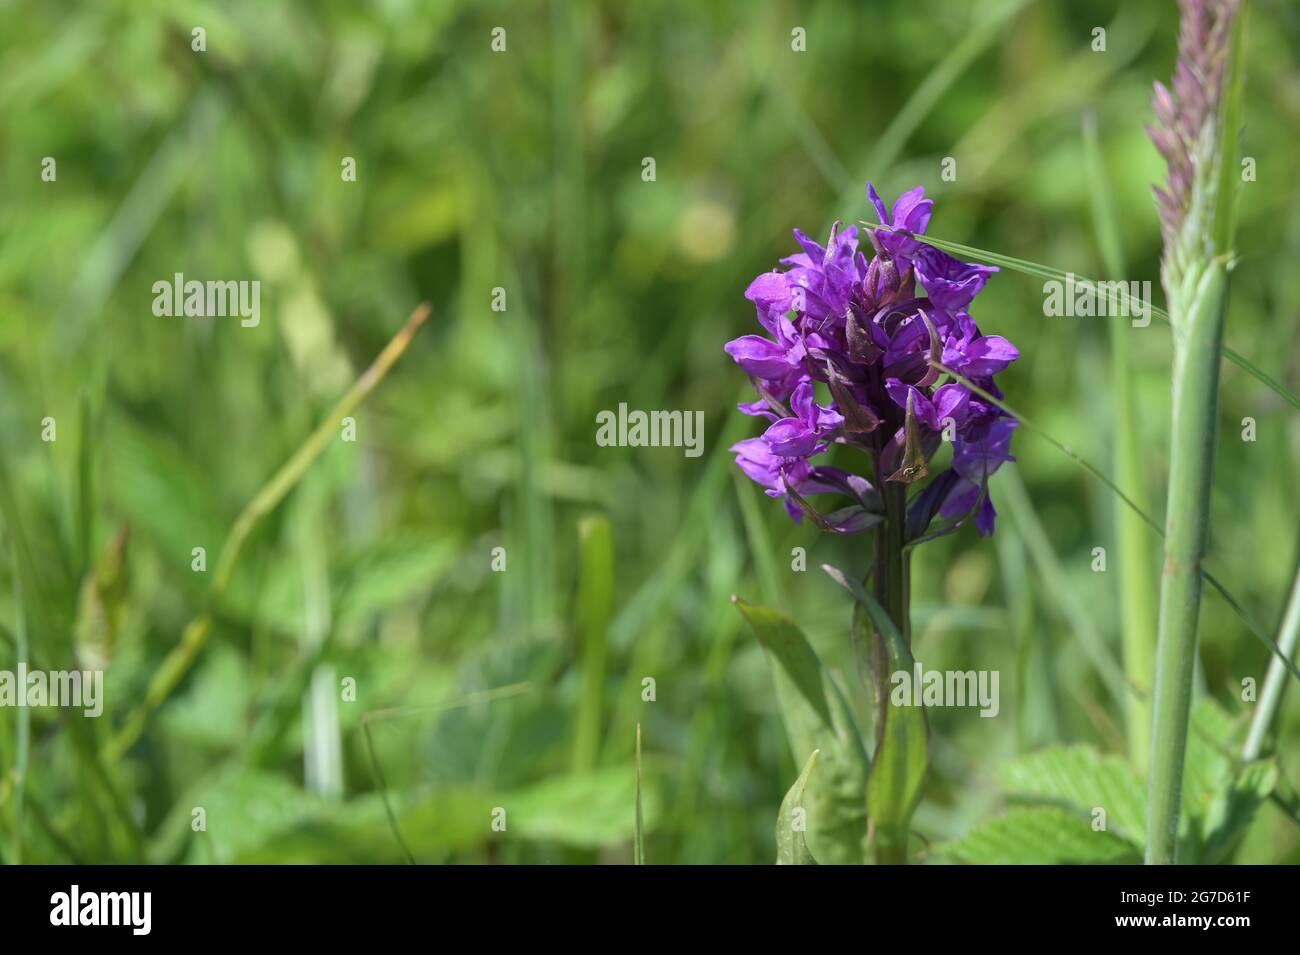 Baltic sea marsh orchid (Dactylorhiza curvifolia), rare wildflower with purple inflorescence growing in the grass of a wetland meadow near Schwerin in Stock Photo